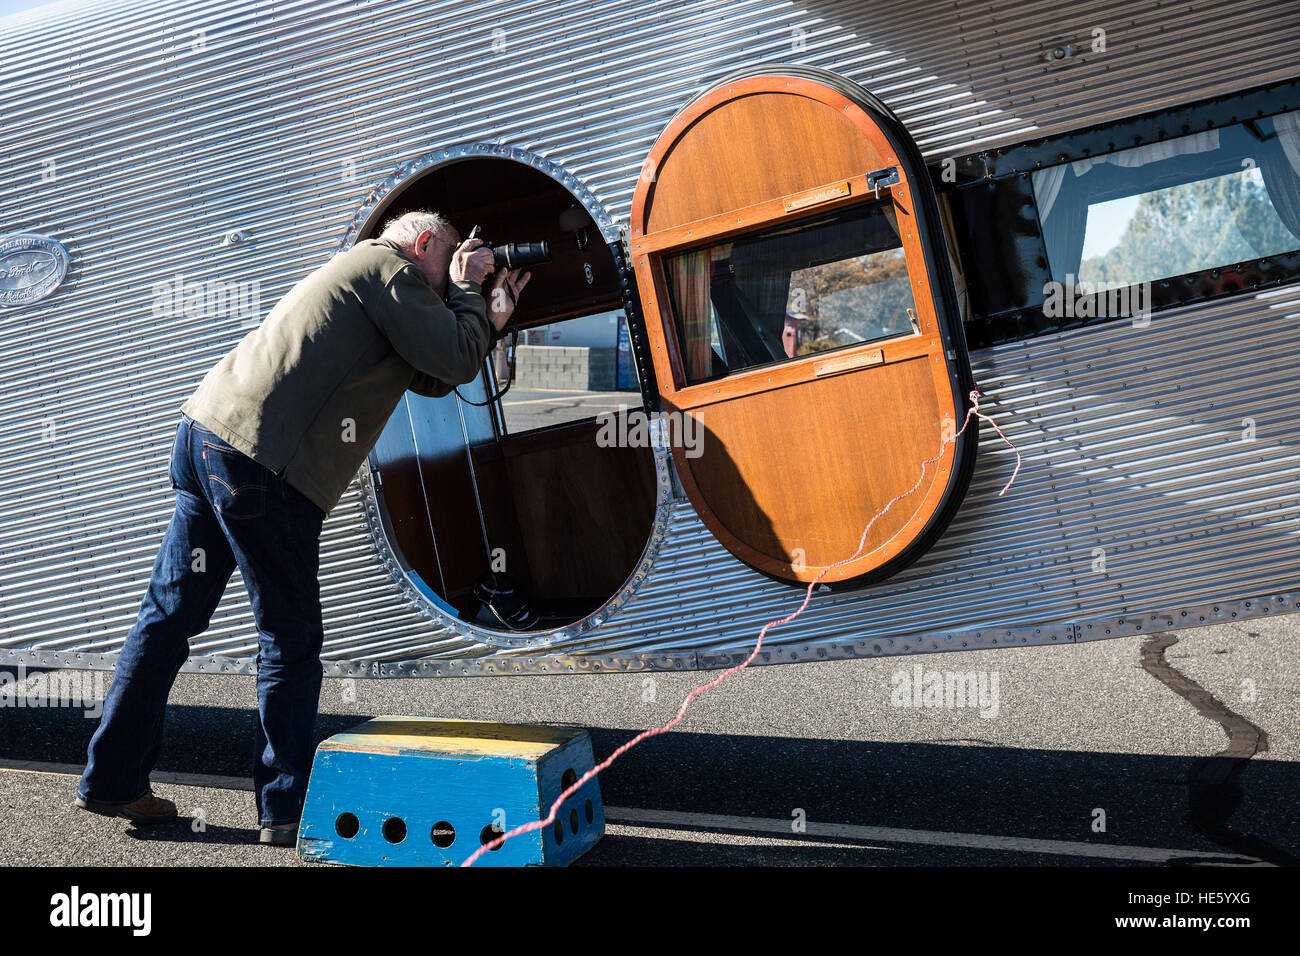 Groveland, California, USA. 17th Dec, 2016. Saturday, December 17, 2016.Tim Dorner, of Sonora, California, takes photos of the interior of a 1928 Ford Tri-Motor airplane, currently offering flights from the Pine Mountain Lake Airport in Groveland.This Ford Tri-Motor NC9645, nicknamed The Tin Goose, has a wingspan of 77 feet 6 inches and was constructed in 1928. It was named the City of Wichita, and it was used to introduce the first coast-to-coast passenger air/rail service in the United States on July 7, 1929, and the development and inauguration of the first all air passenger service Stock Photo